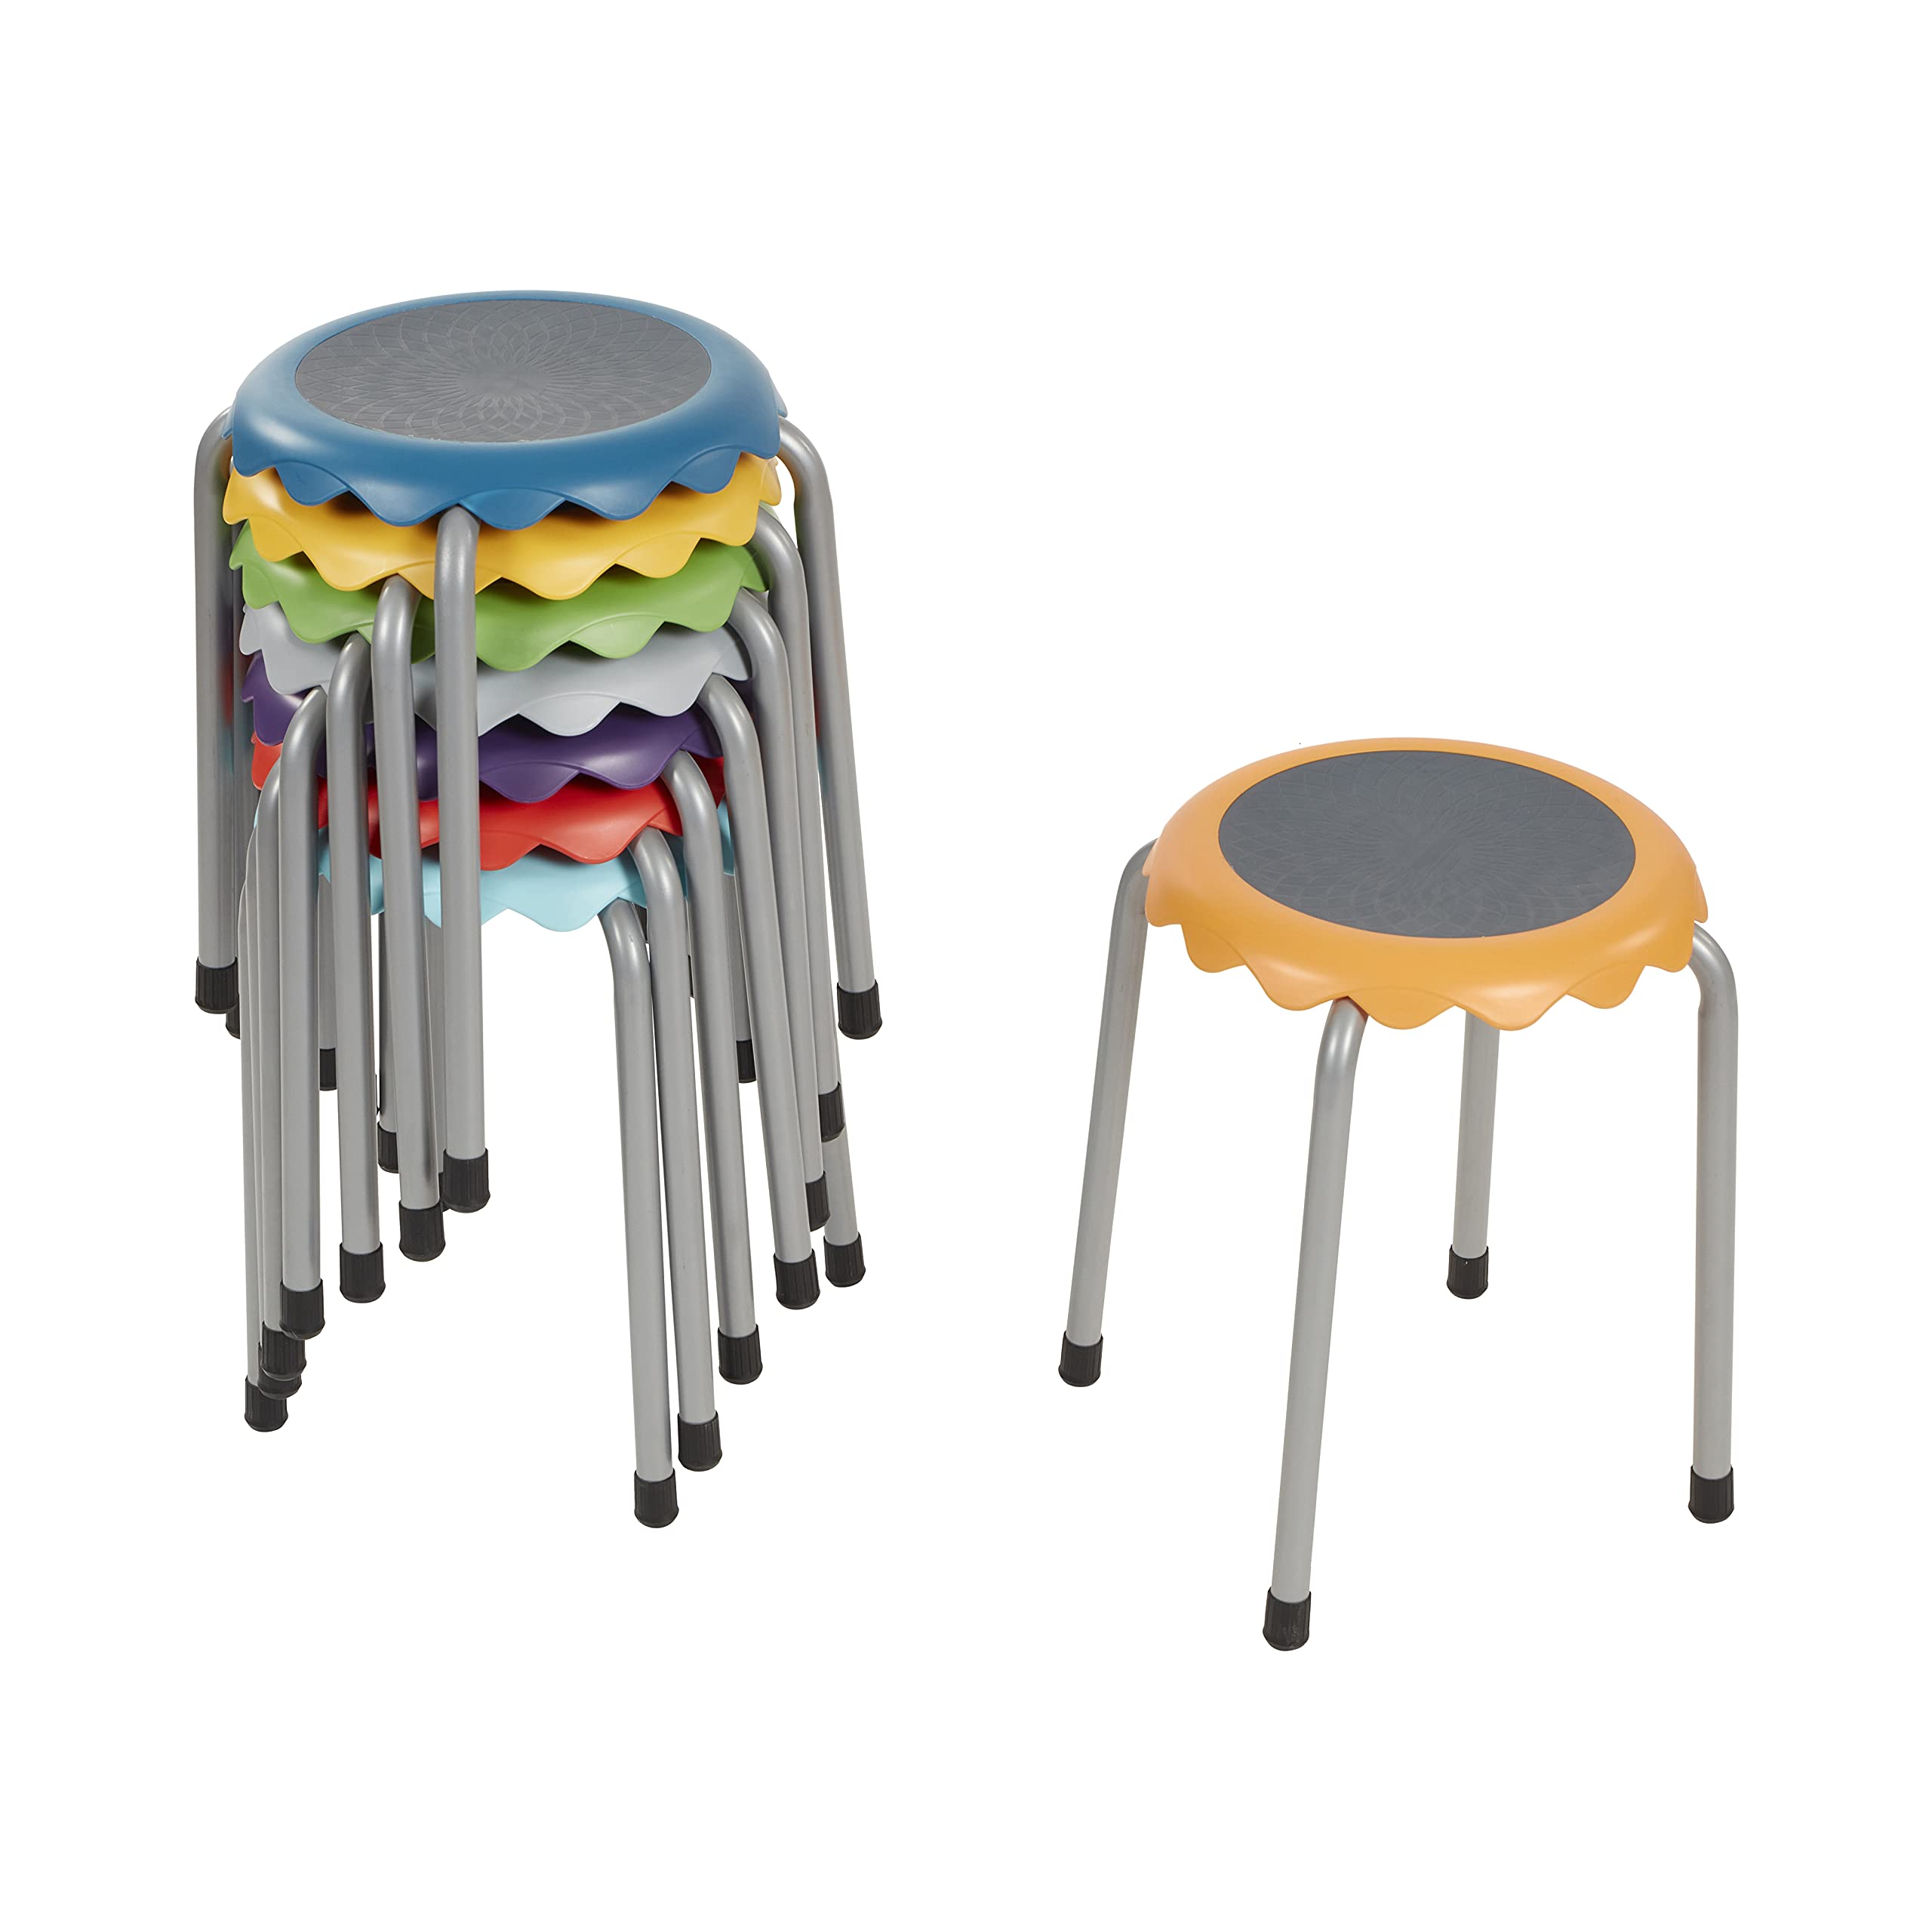 ECR4Kids Daisy Stackable Stool Set, Flexible Seating, 17-Inch Seat Height